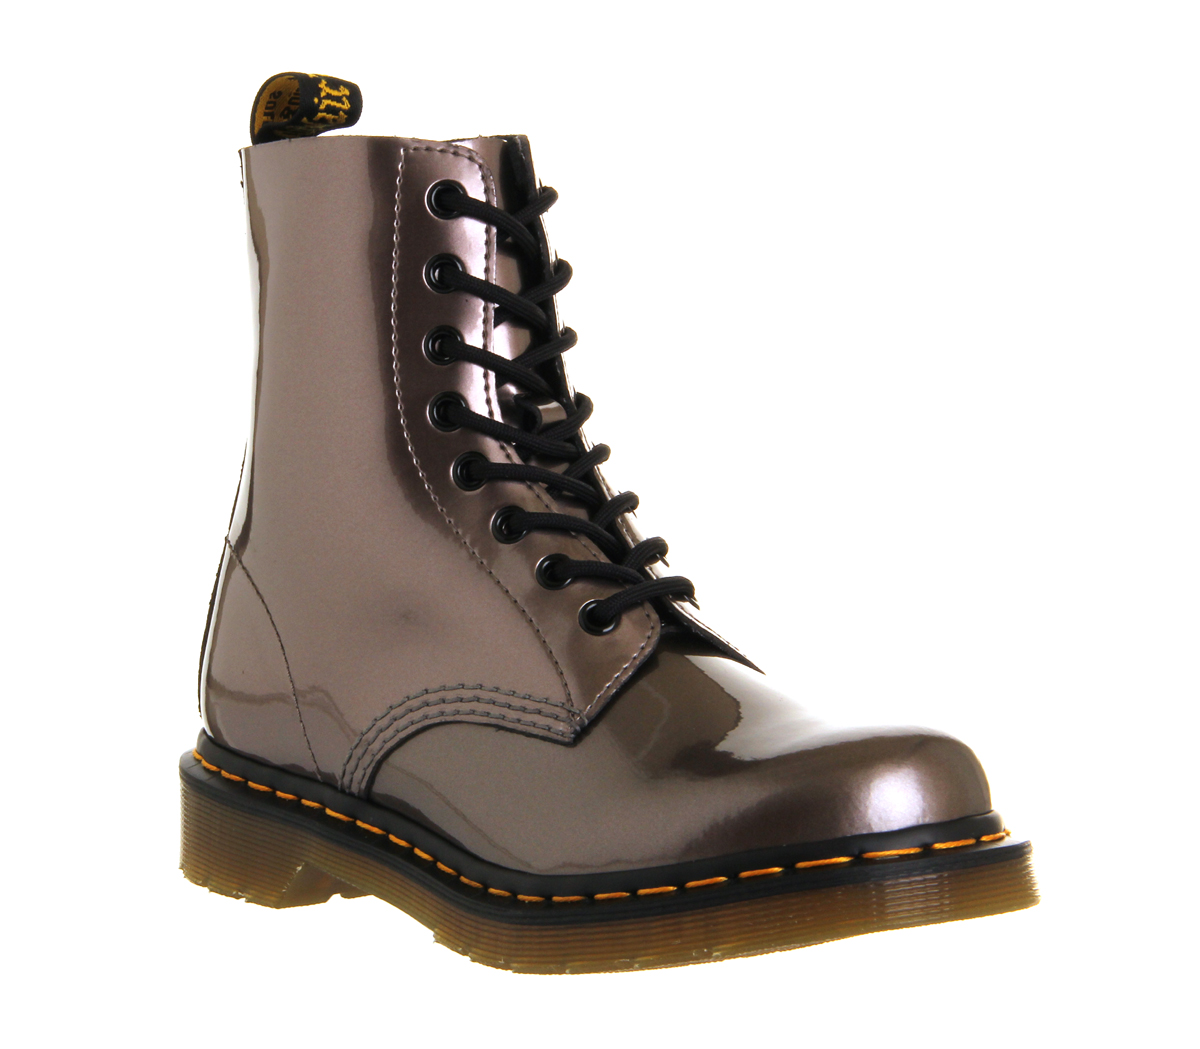 Dr. Martens8 Eyelet Lace Up bootsPewter Spectra Patent